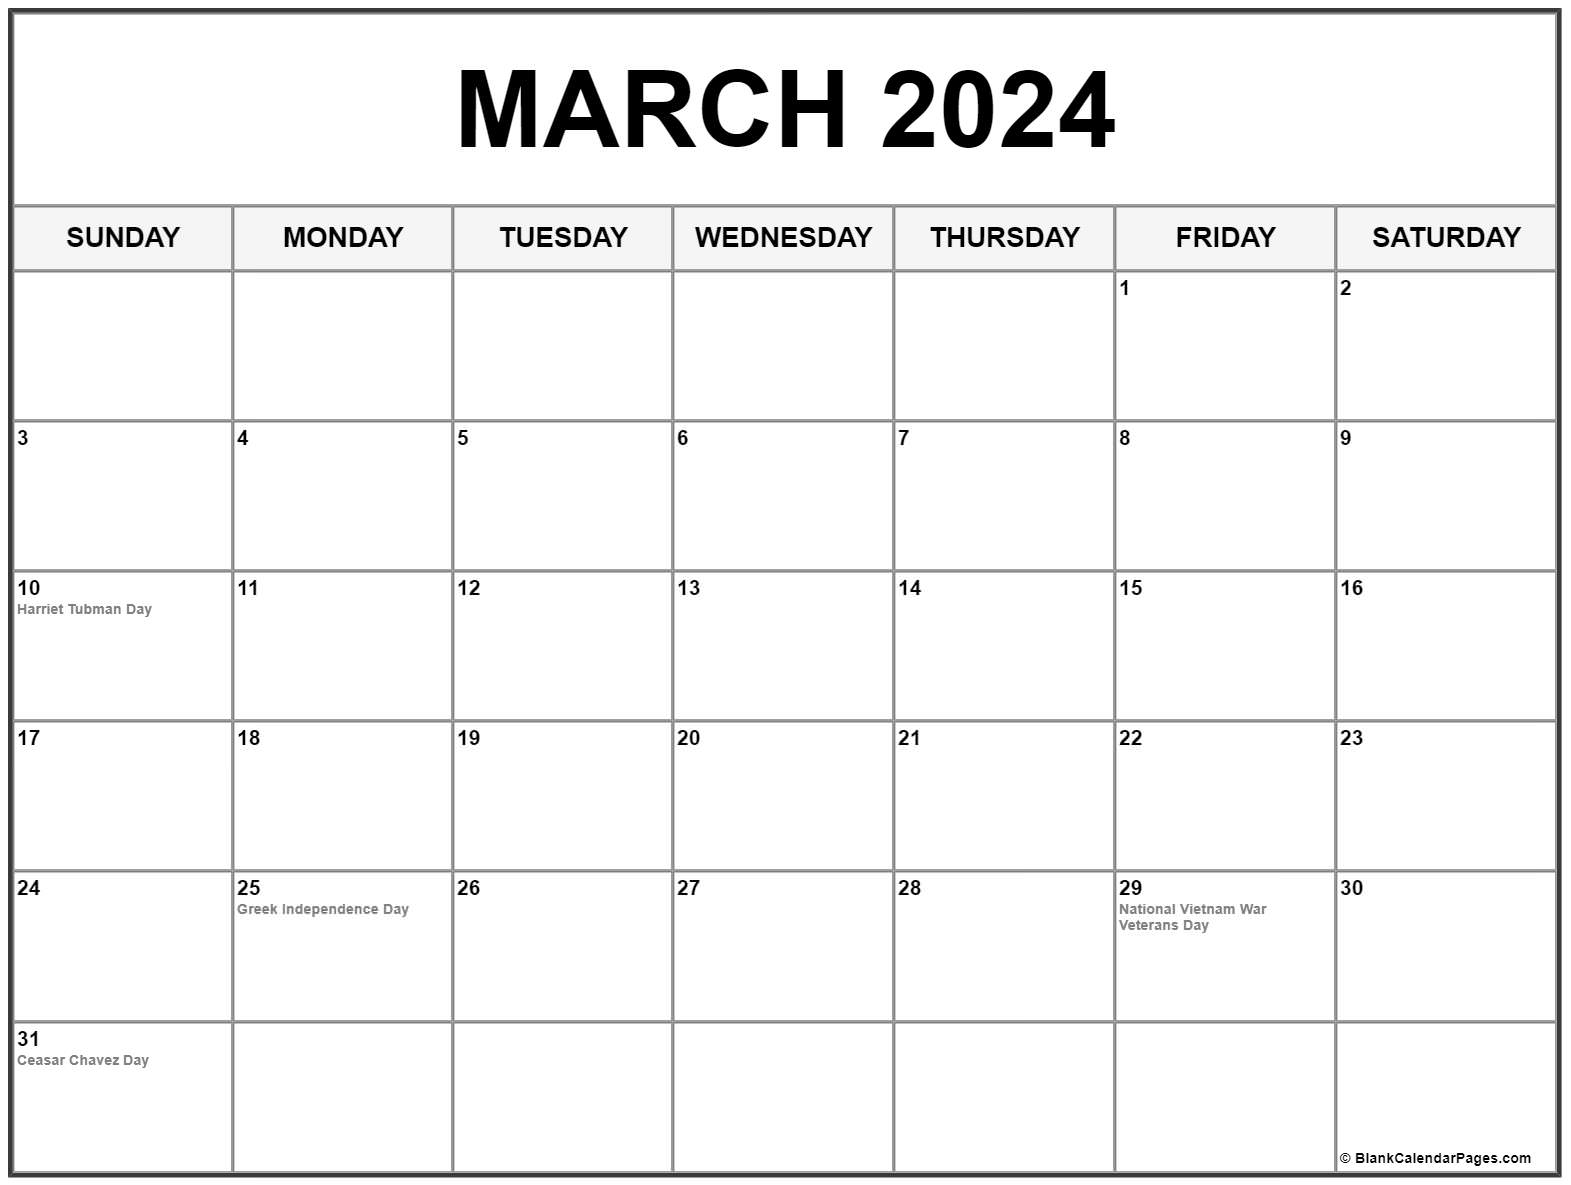 March Calendar 2021 With Holidays March 2021 calendar with holidays